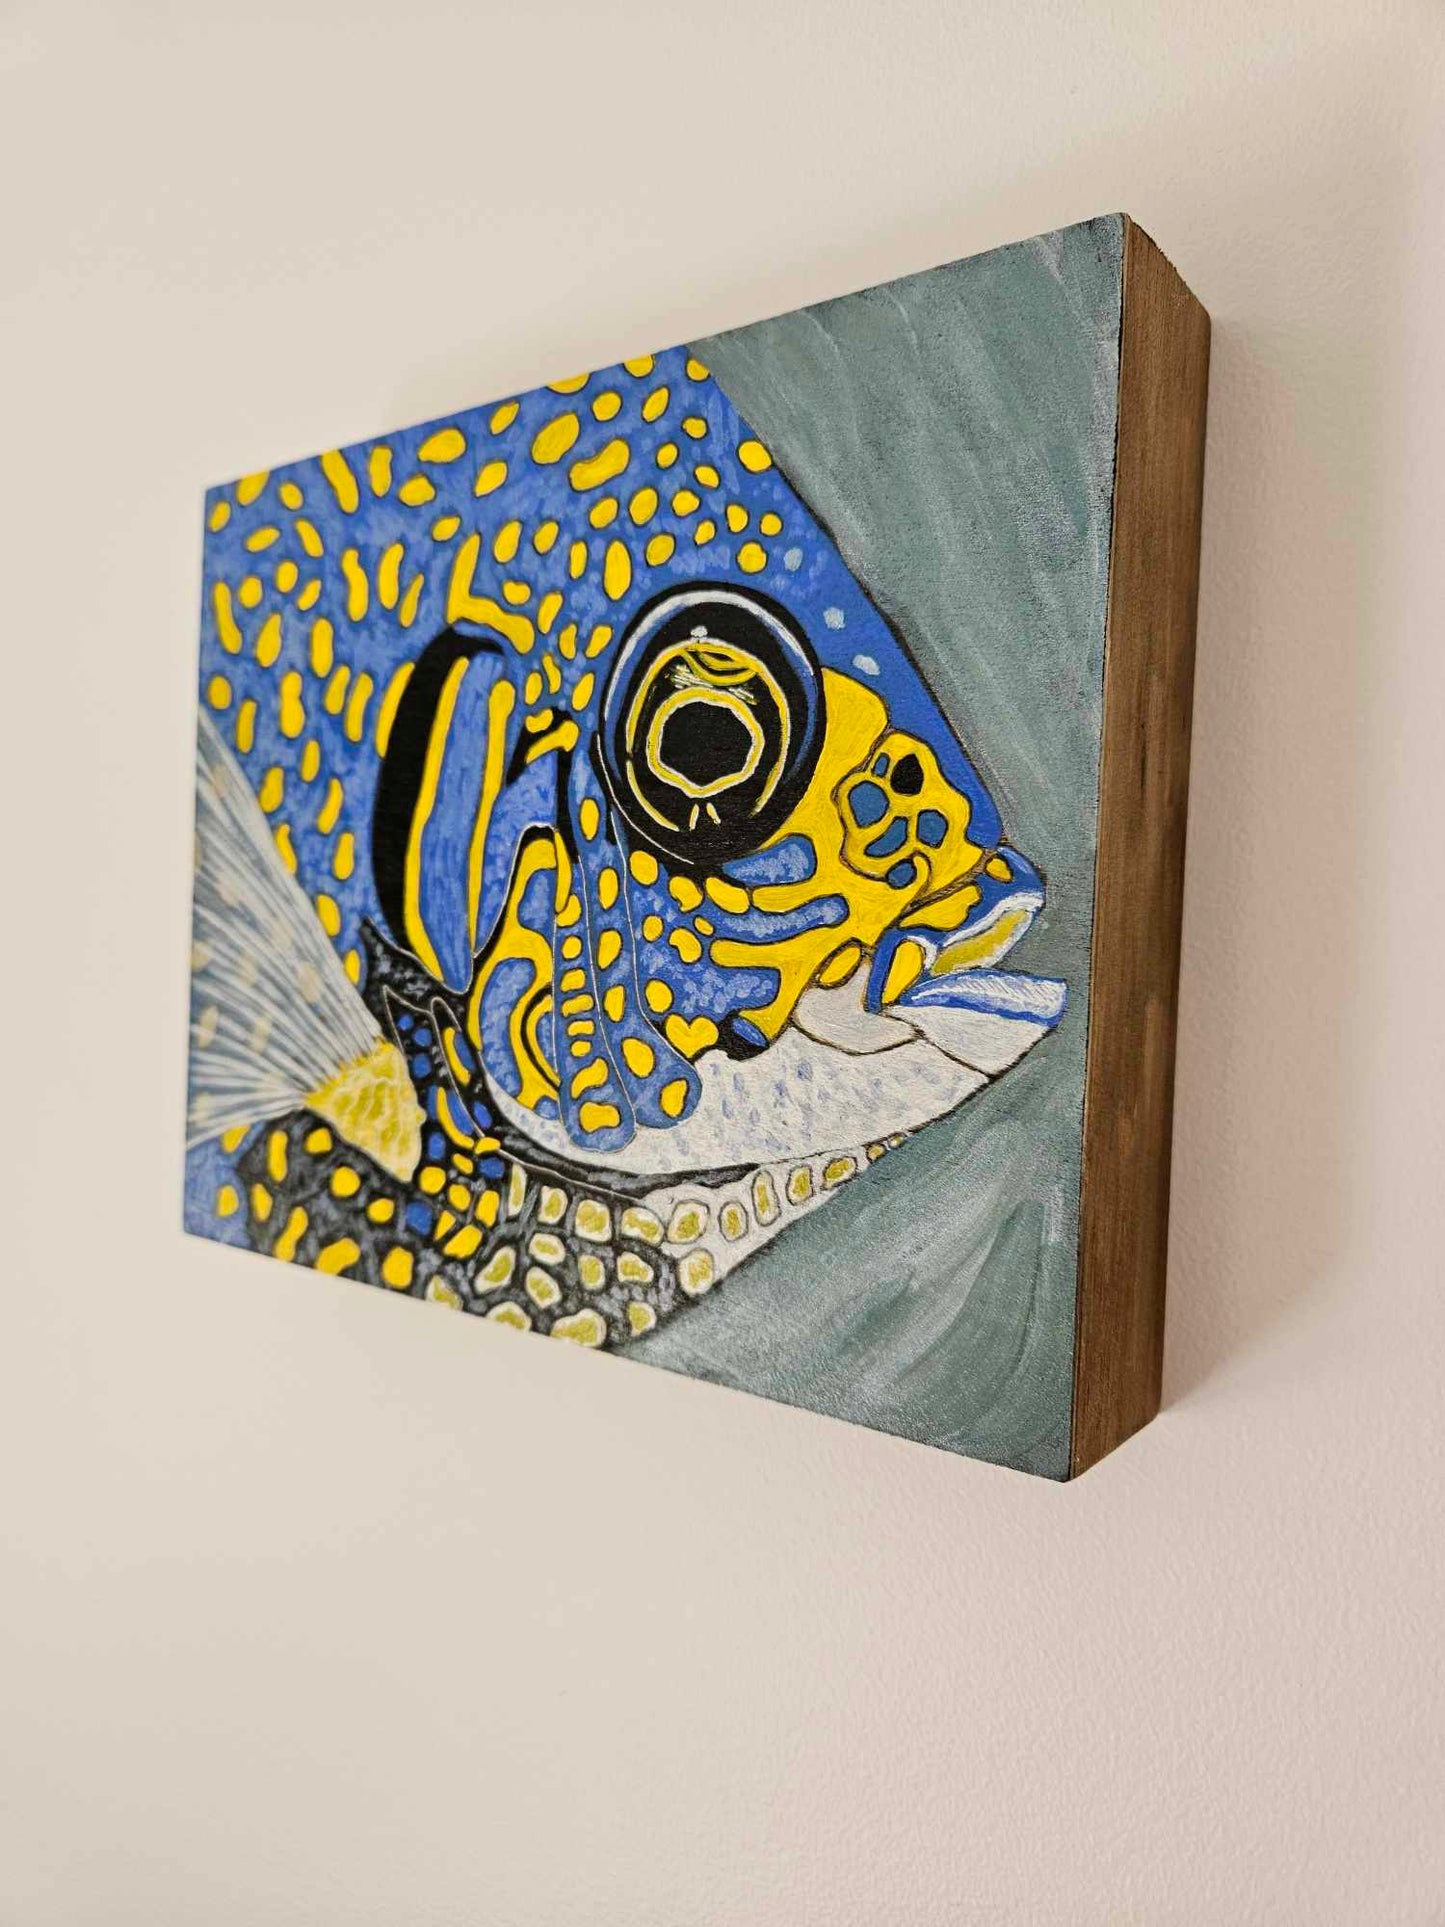 Little Blue - On Timber SOLD